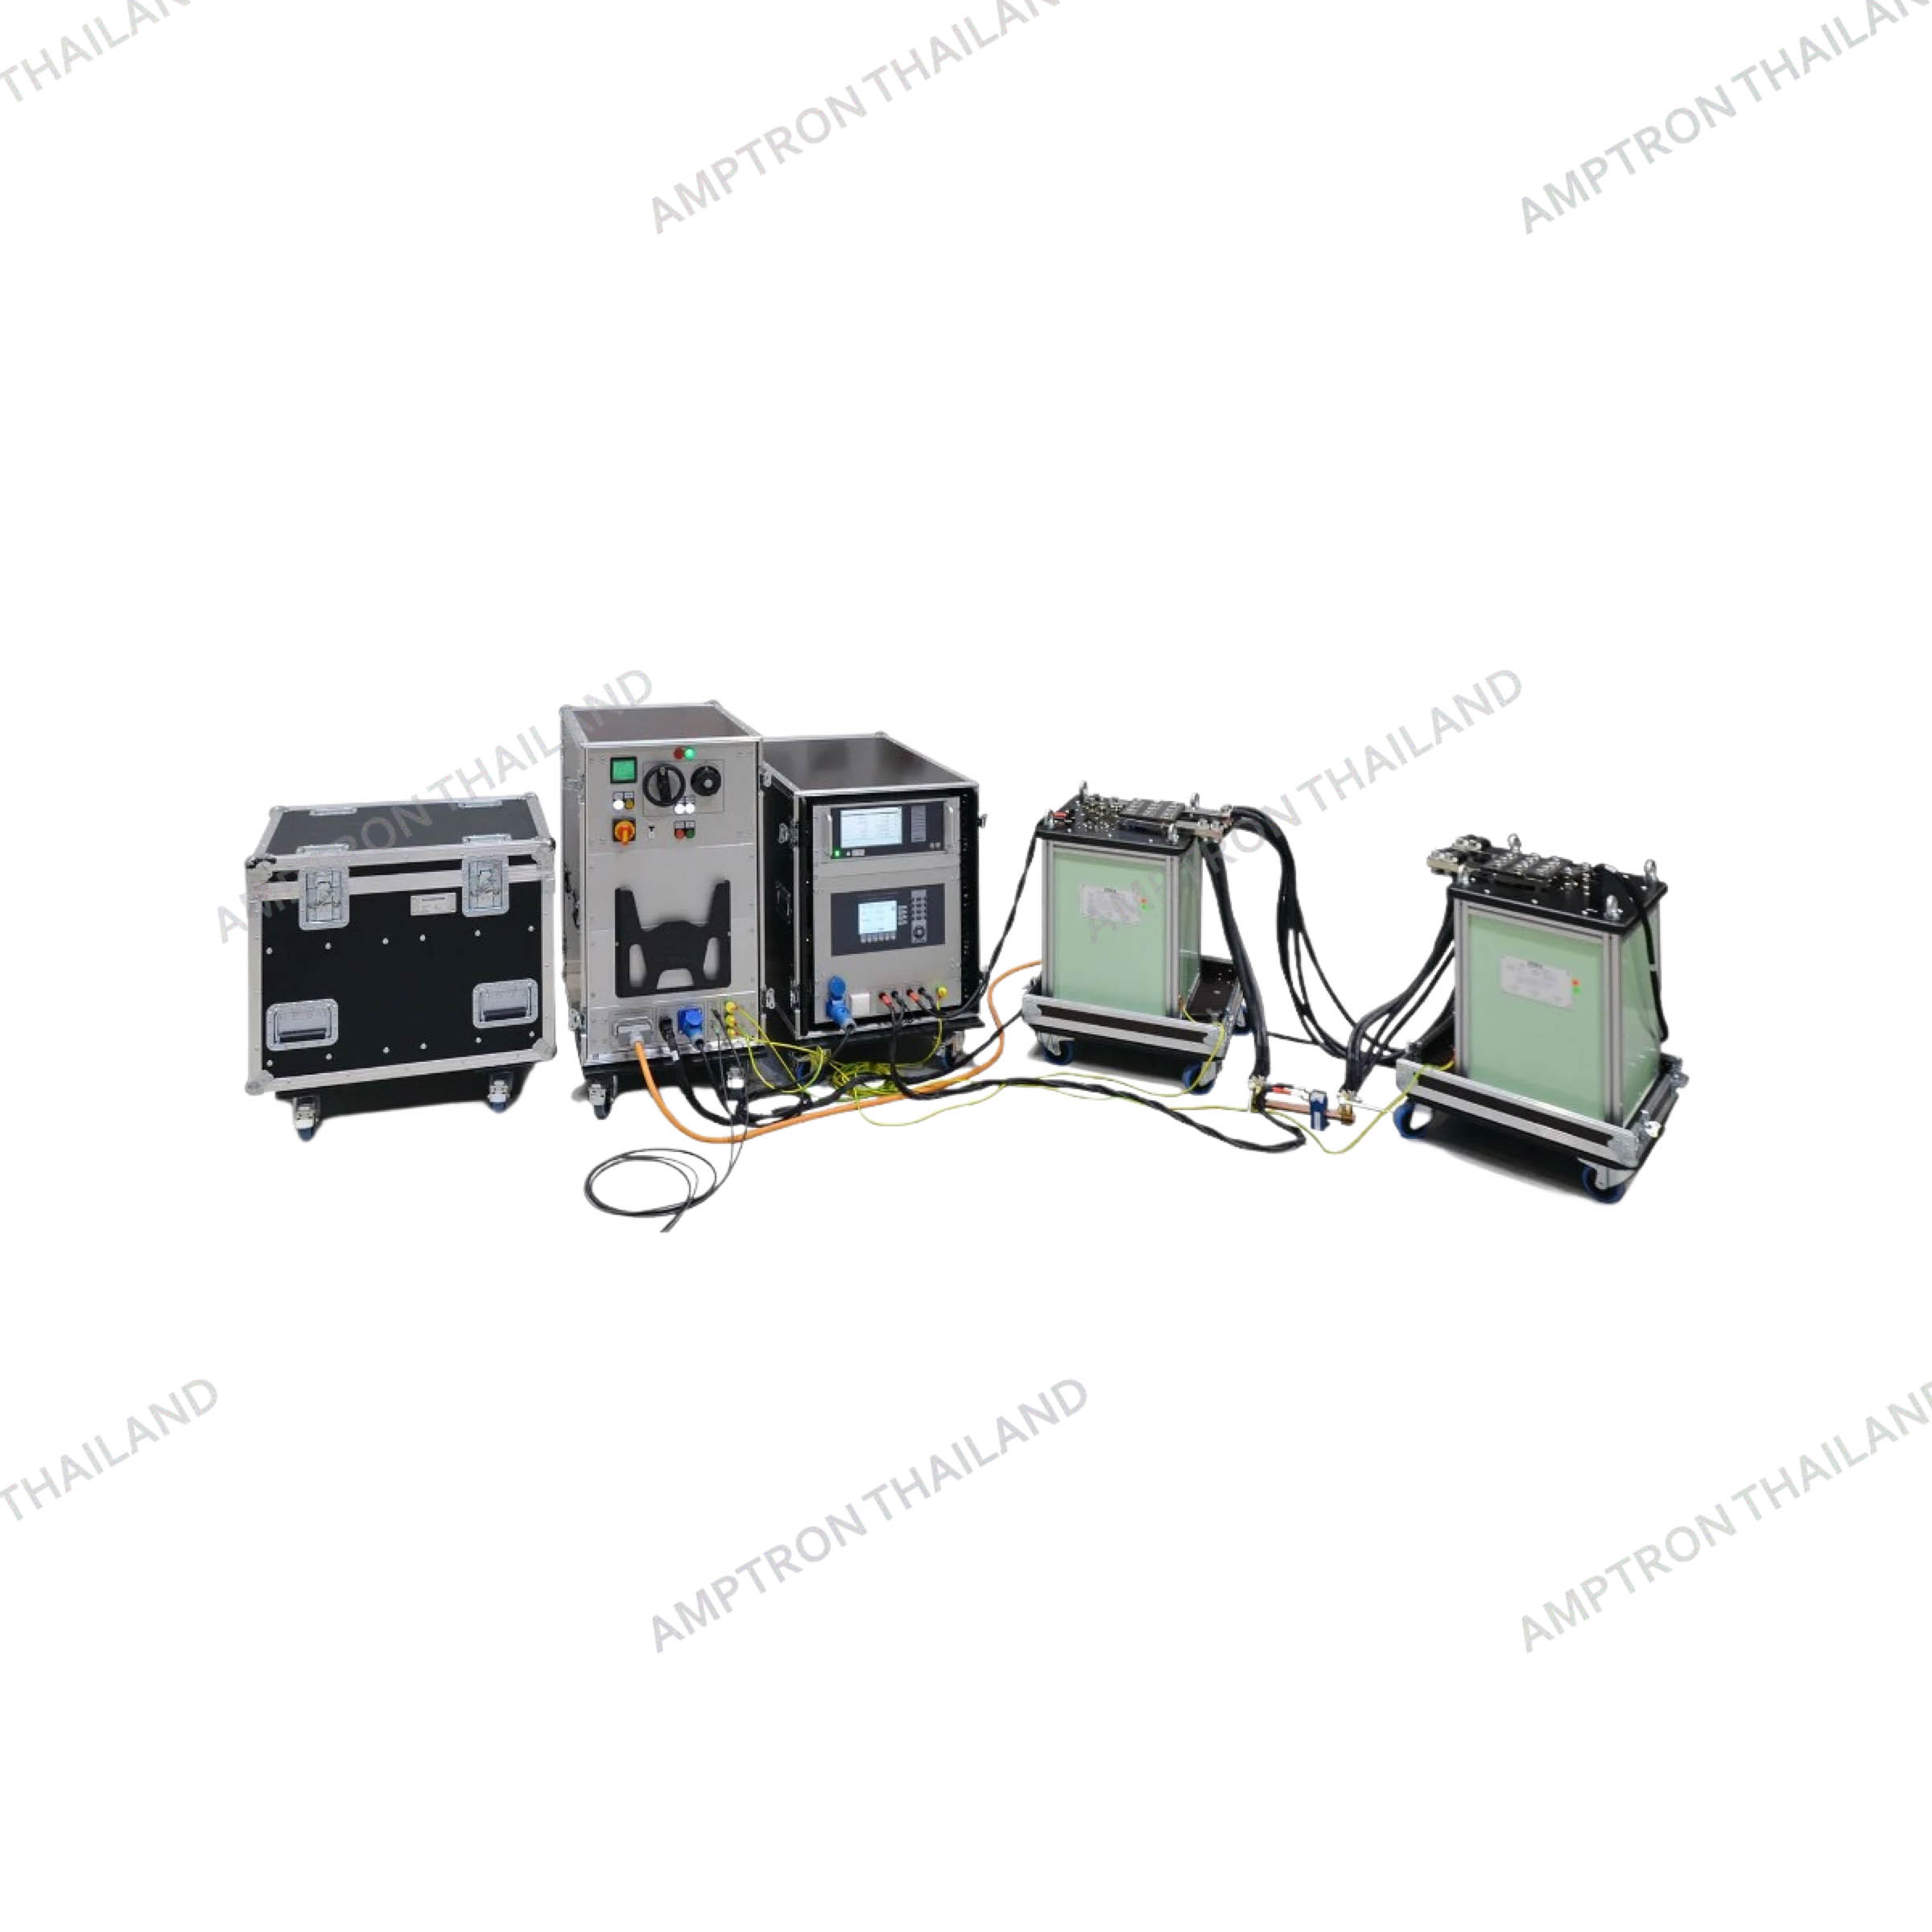 ITTS eco (CT-16) Mobile and transportable CT Test System